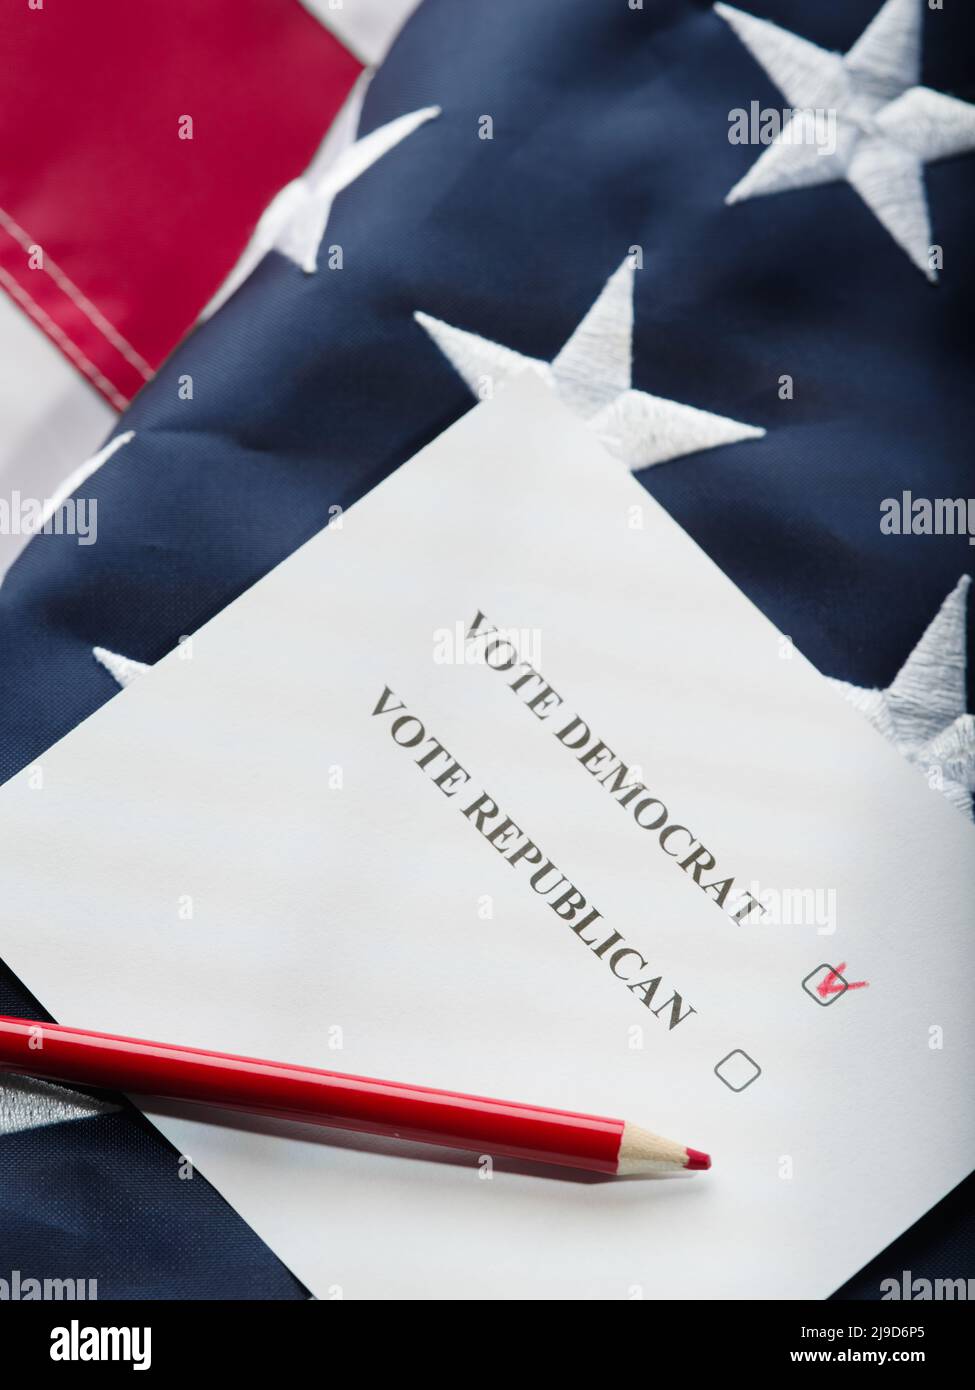 On the American flag is a ballot with a mark opposite the Democrat and a pencil. Elections, freedom of choice, politics, candidates, debates, civic du Stock Photo